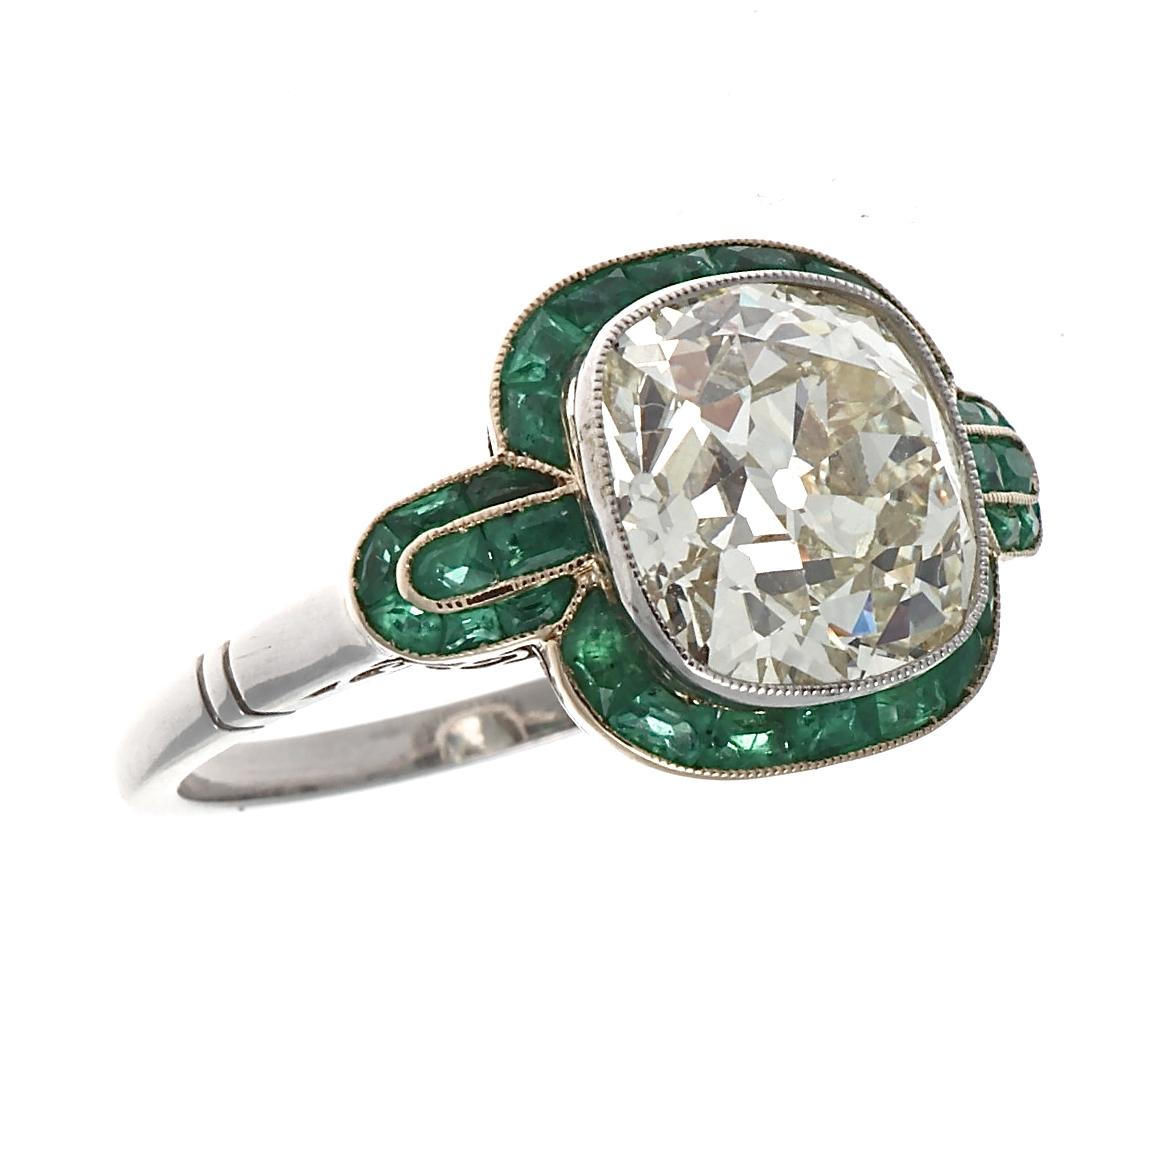 This Art Deco inspired ring features a  4.49 carat old European cut diamond that is approximately M color, VS clarity. Elegantly surrounded by perfectly calibrated vivid natural green emeralds accentuating the natural beauty of the center diamonds.